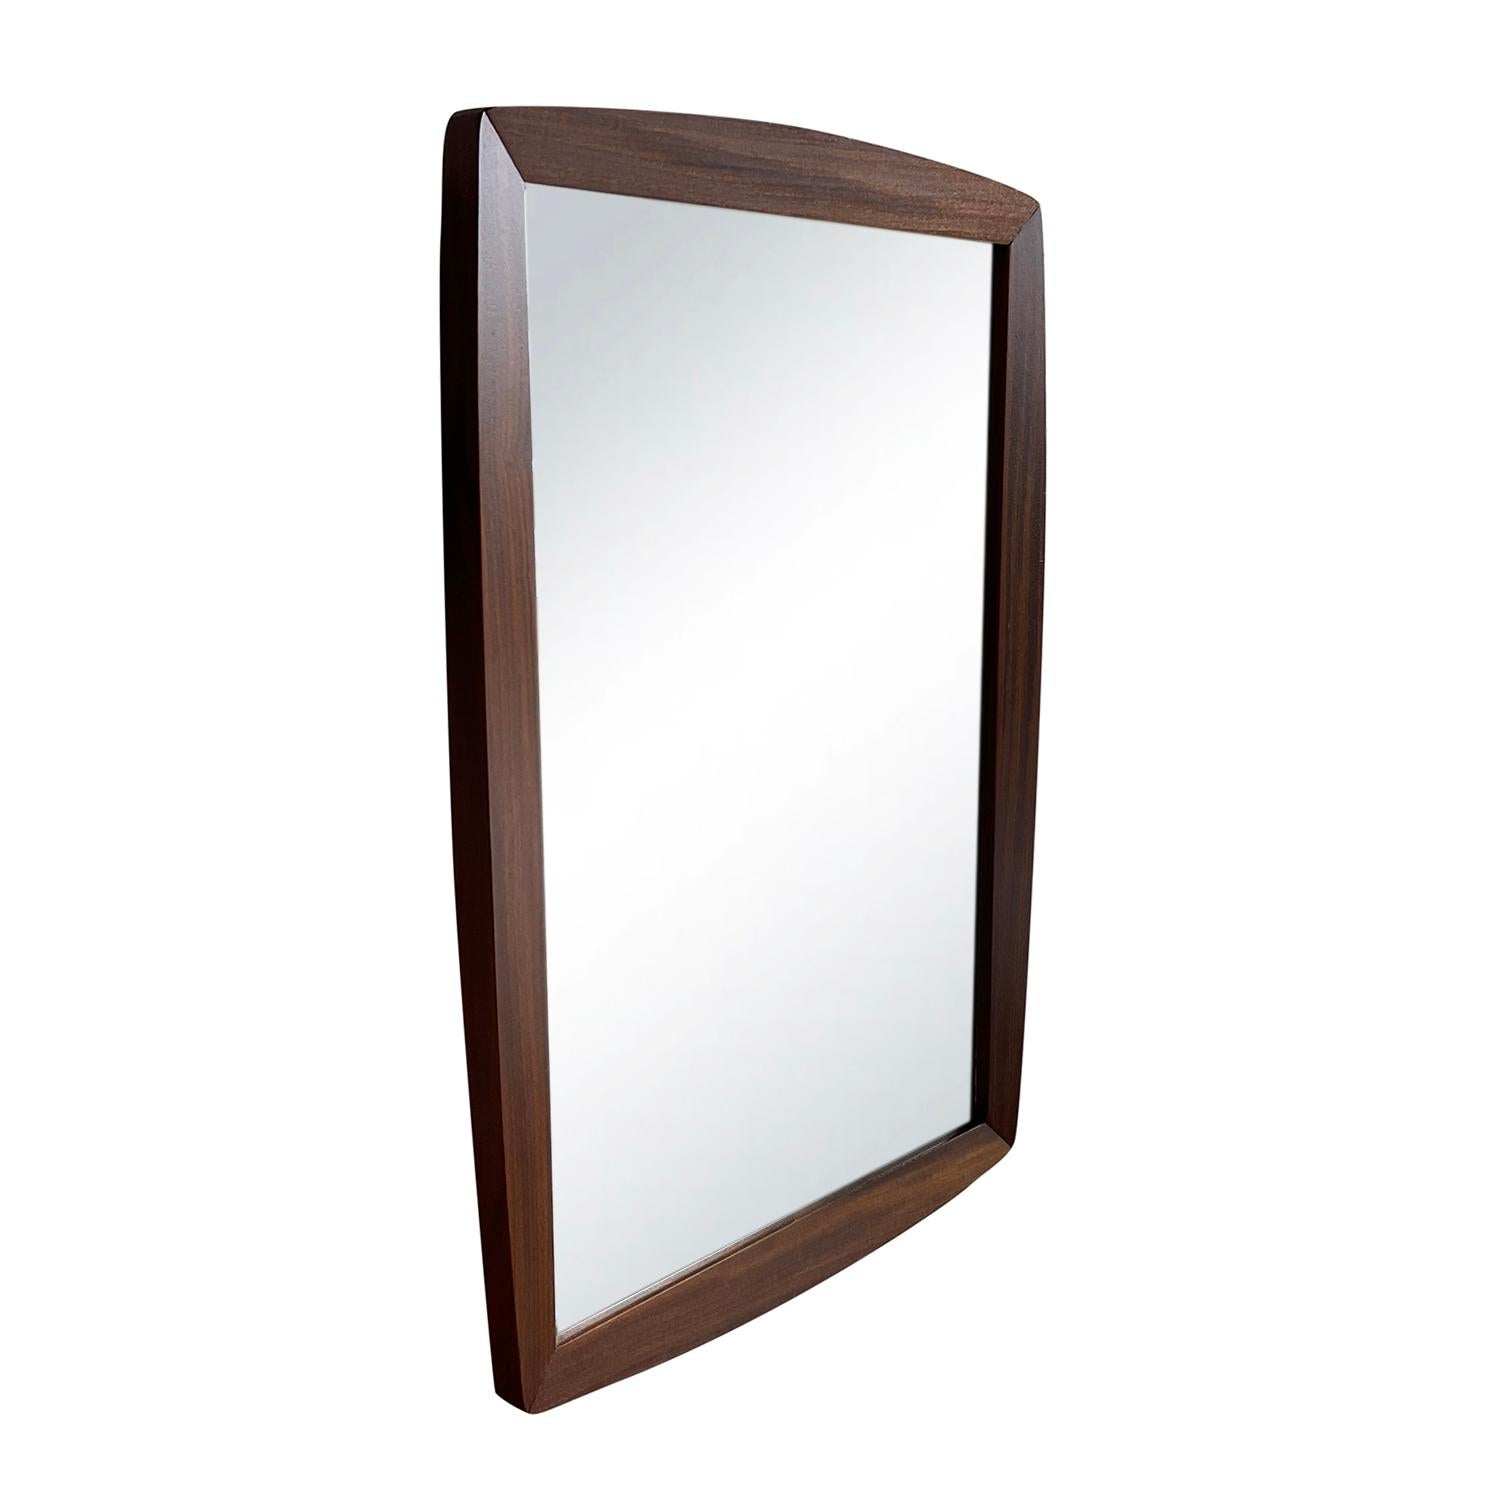 A small dark-brown, vintage Art Deco Danish wall mirror made of hand carved Walnut, in good condition. The mirrored glass is original. Wear consistent with age and use, circa 1930 - 1950, Denmark, Scandinavia.